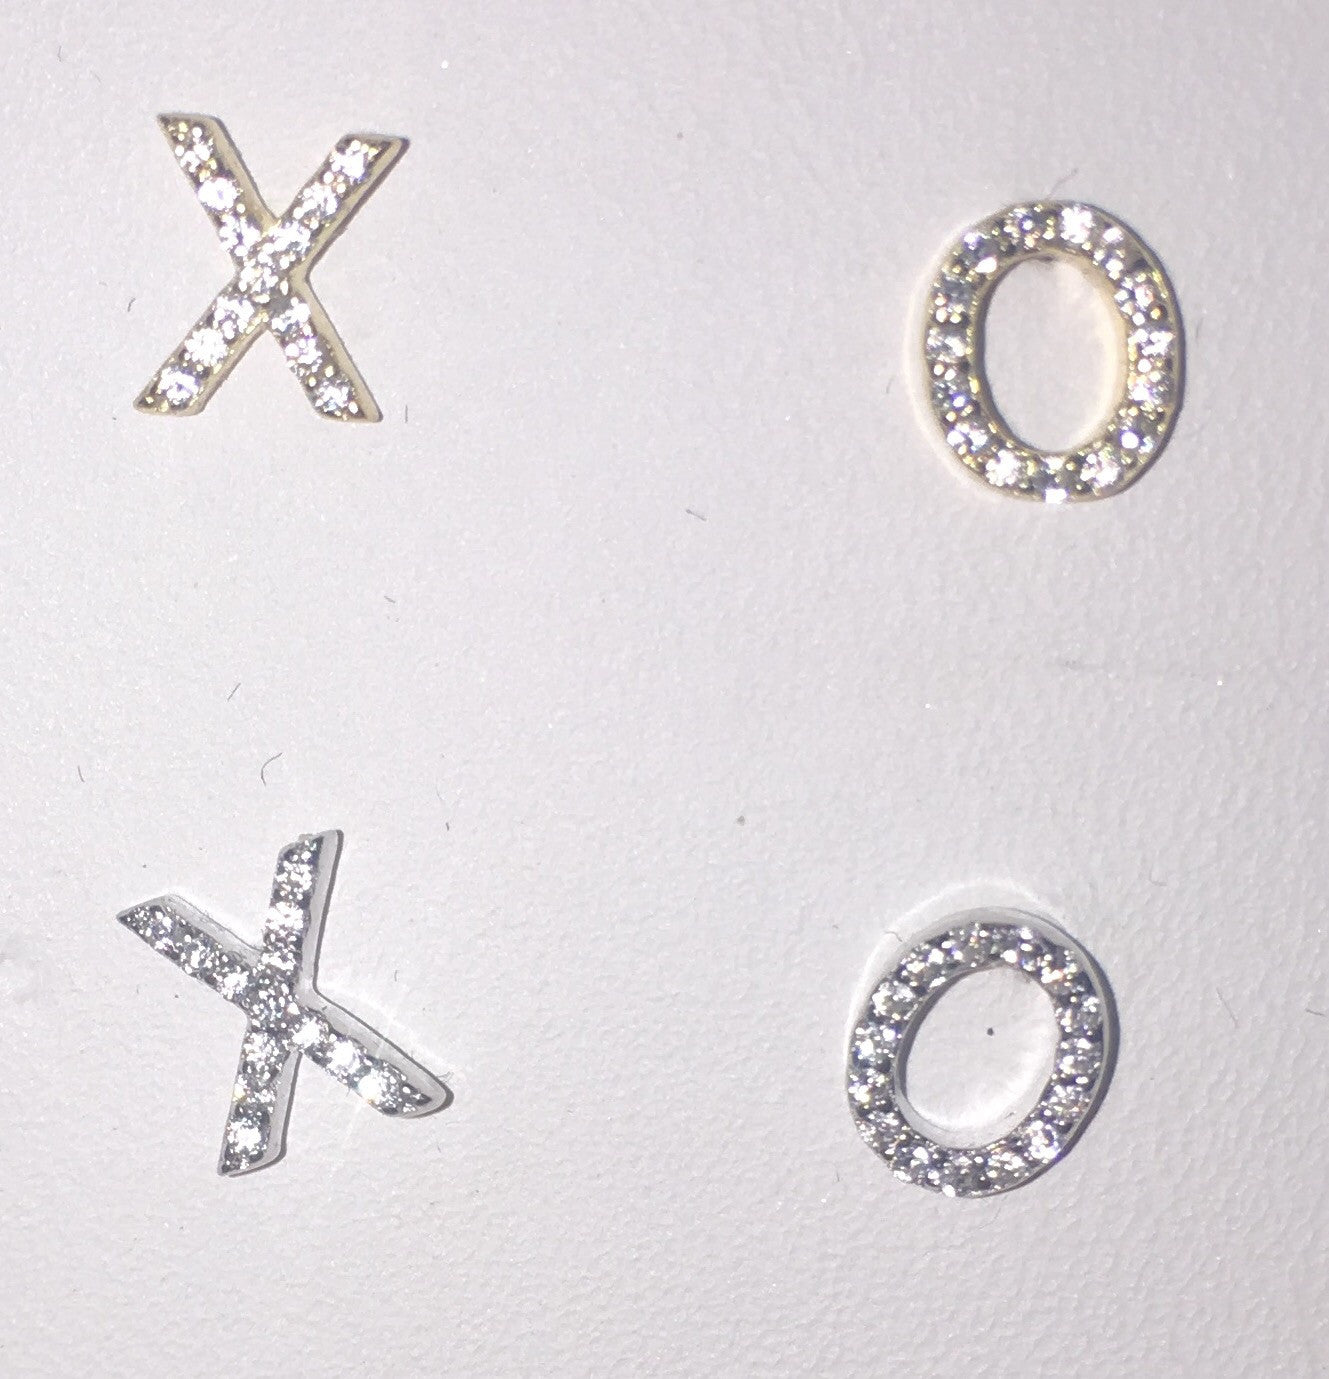 XO Stud Earrings - Retail Therapy Jewelry